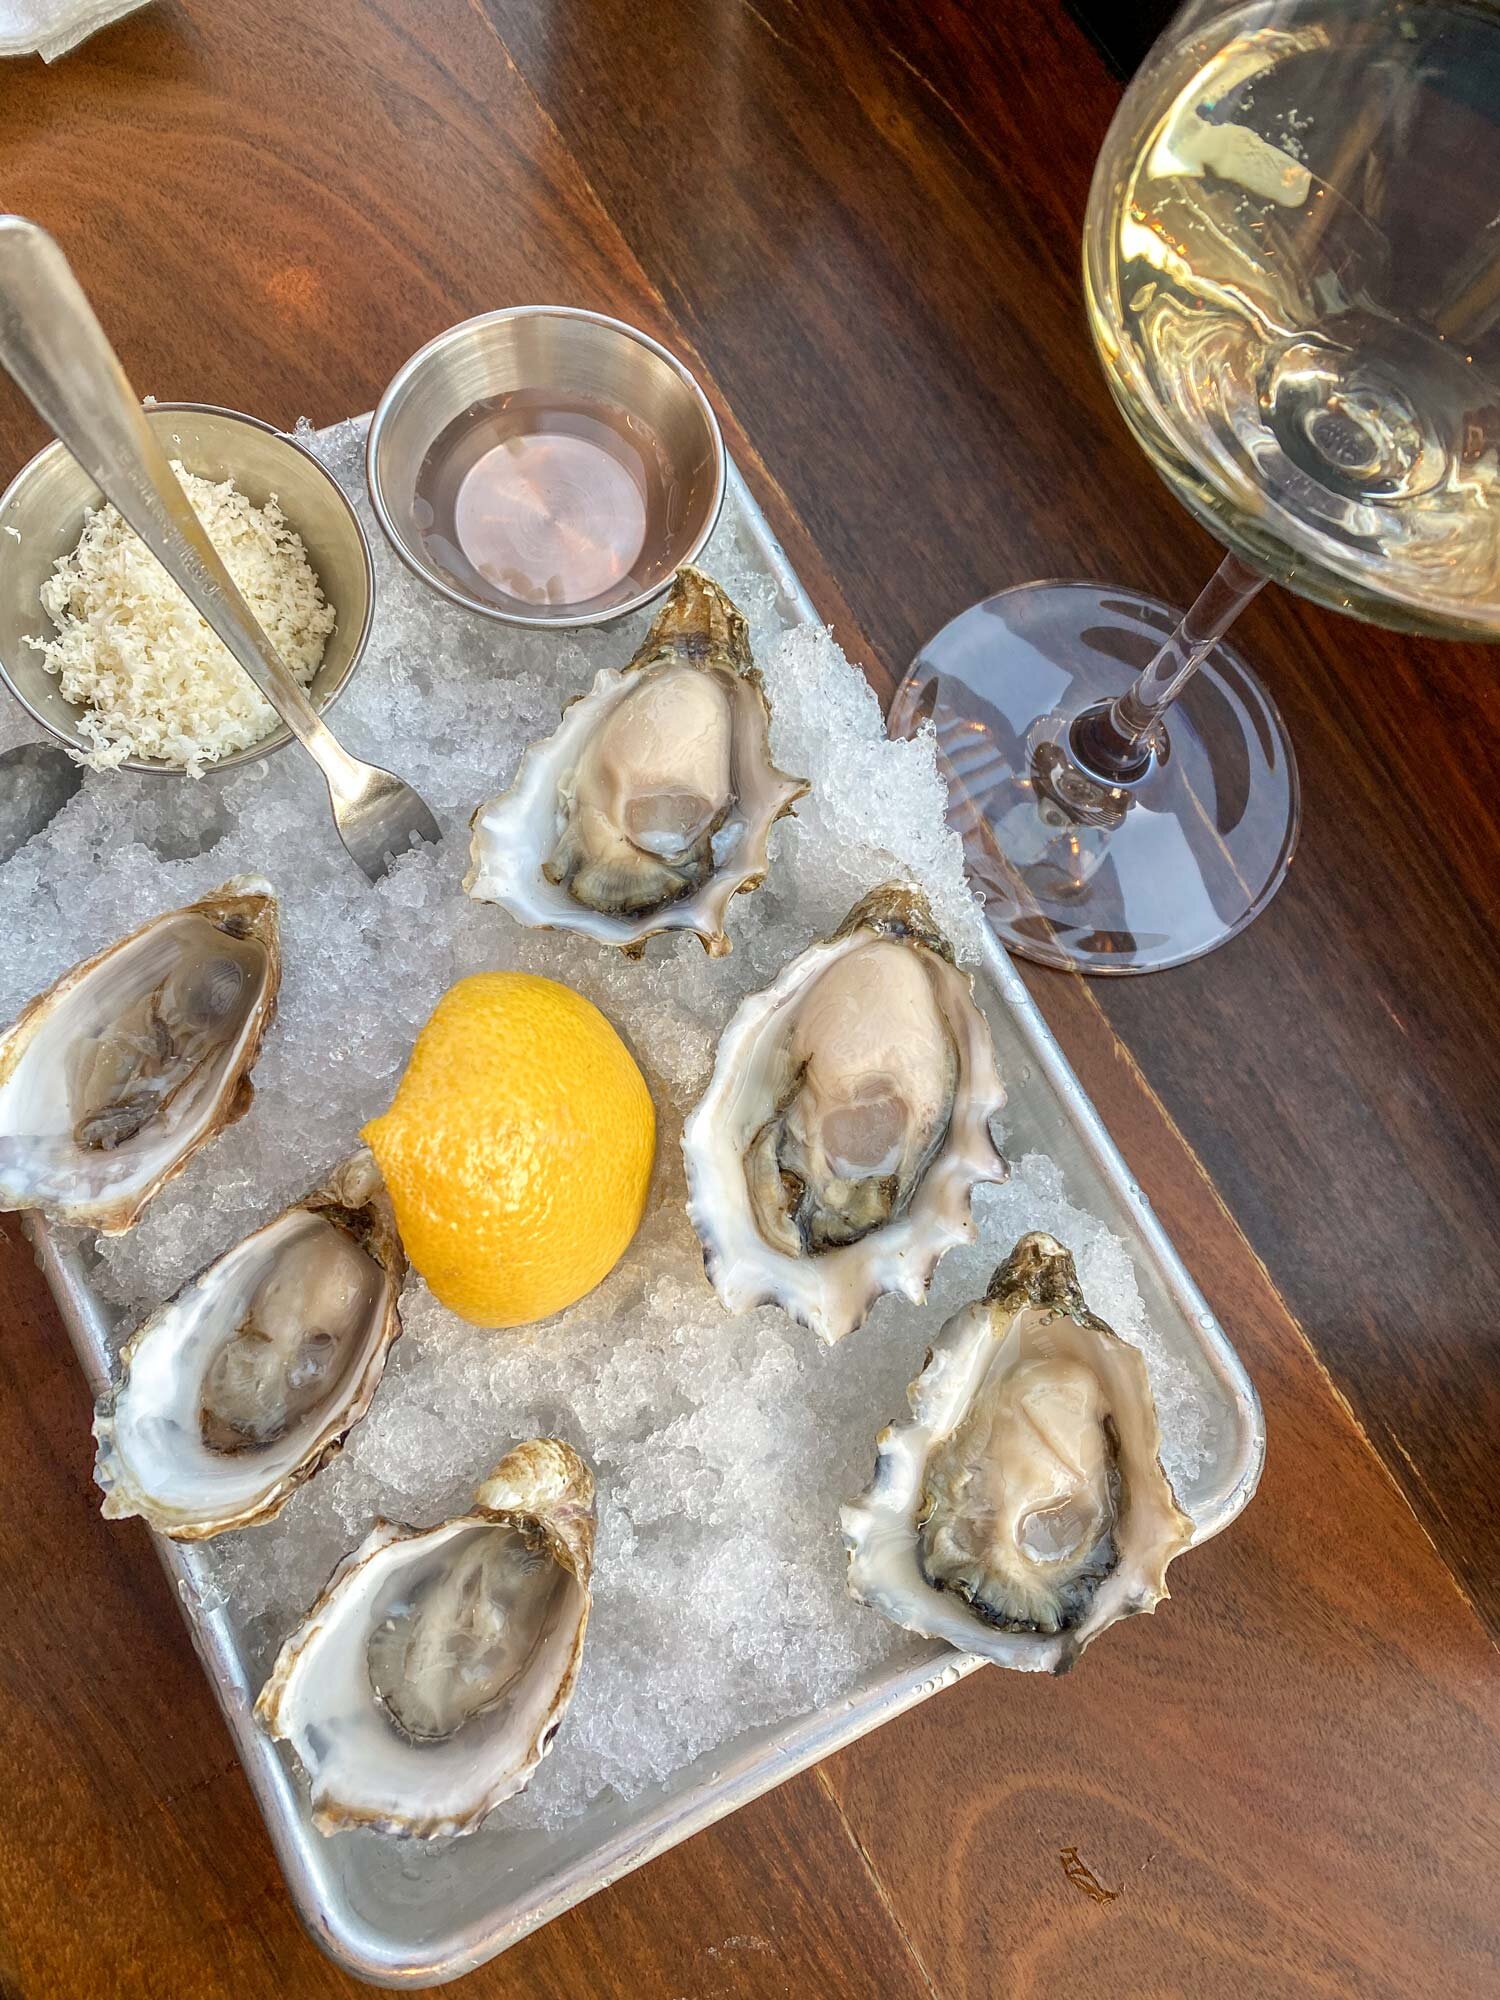 Oyster plate with white wine